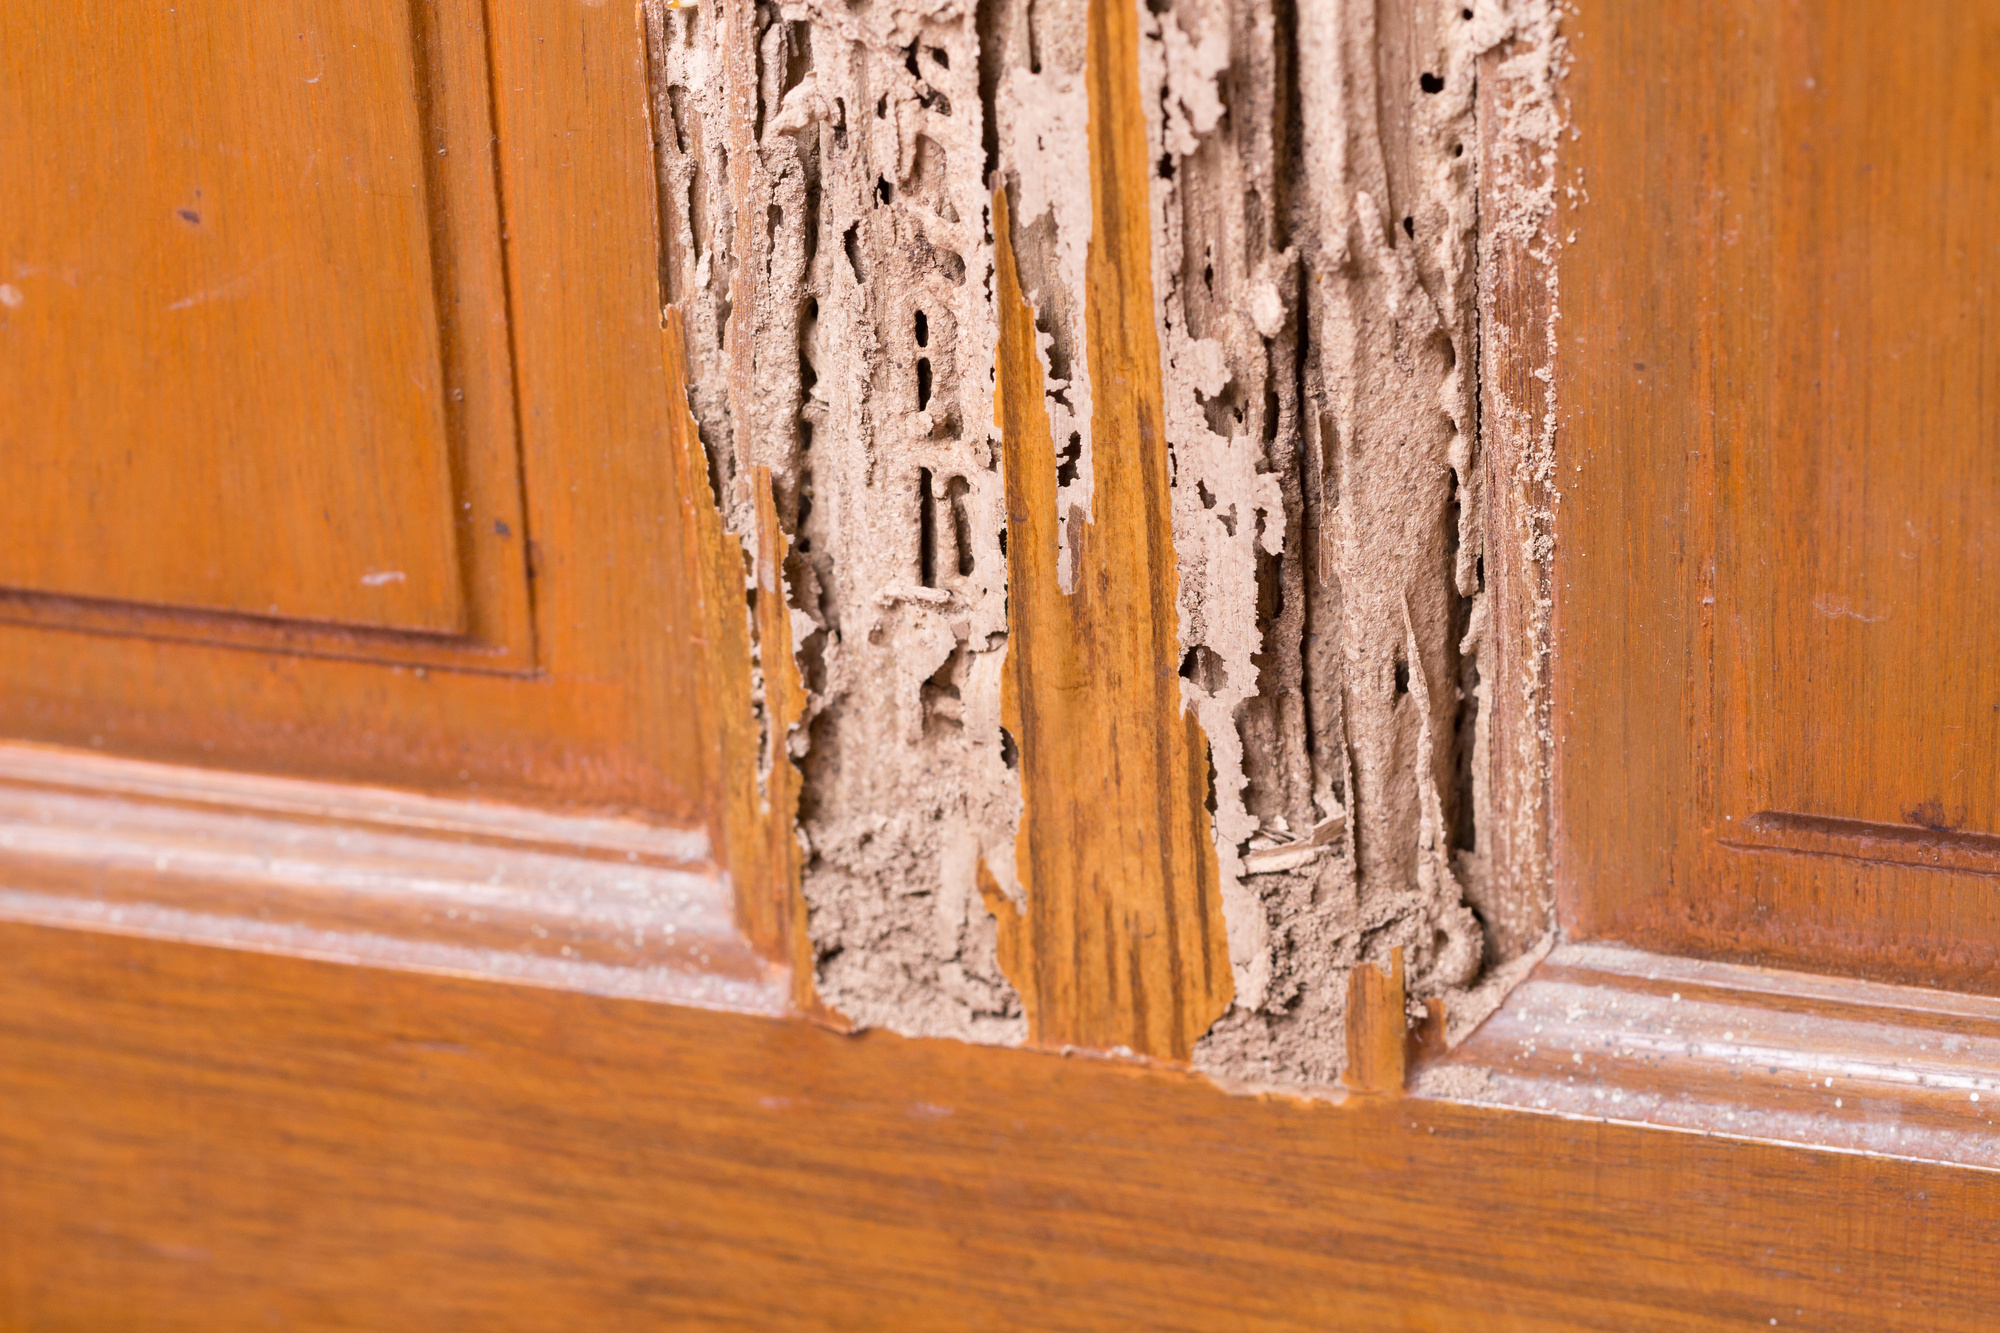 What Do Termites Eat? The Different Types of Wood Explained